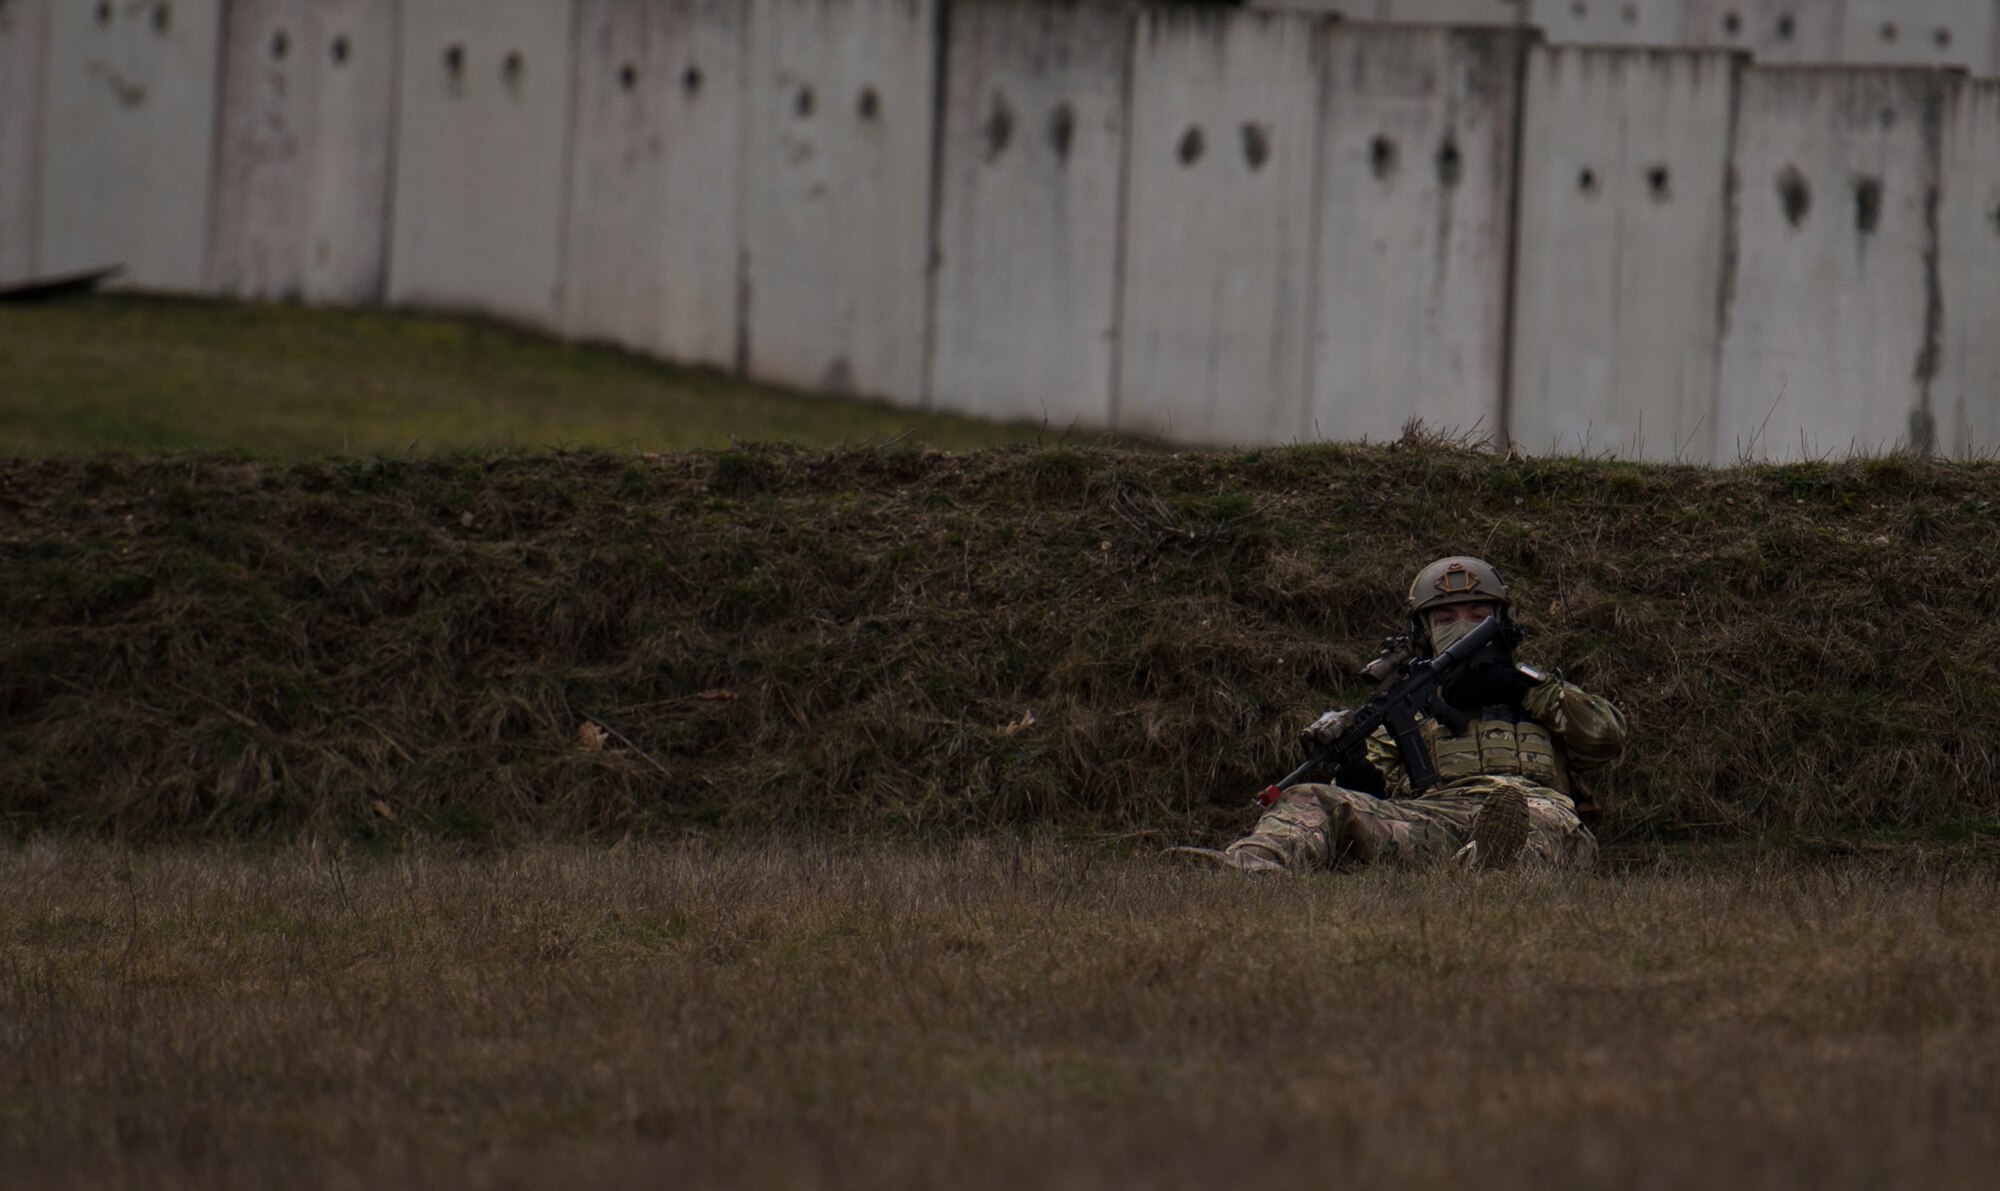 Senior Airman Martin Dietrich, 2nd Air Support Operations Squadron tactical air control party member, takes cover behind a hill during training at U.S. Army Garrison Bavaria in Vilseck, Germany, Feb. 8, 2016. The training consisted of Airmen calling in close air support, neutralizing opposing forces and practicing medical evacuation by helicopter. By conducting the training in an urban environment the ASOS team was forced to think about proper tactics to ensure they weren’t caught in the line of fire. (U.S. Air Force photo/Senior Airman Jonathan Stefanko) 